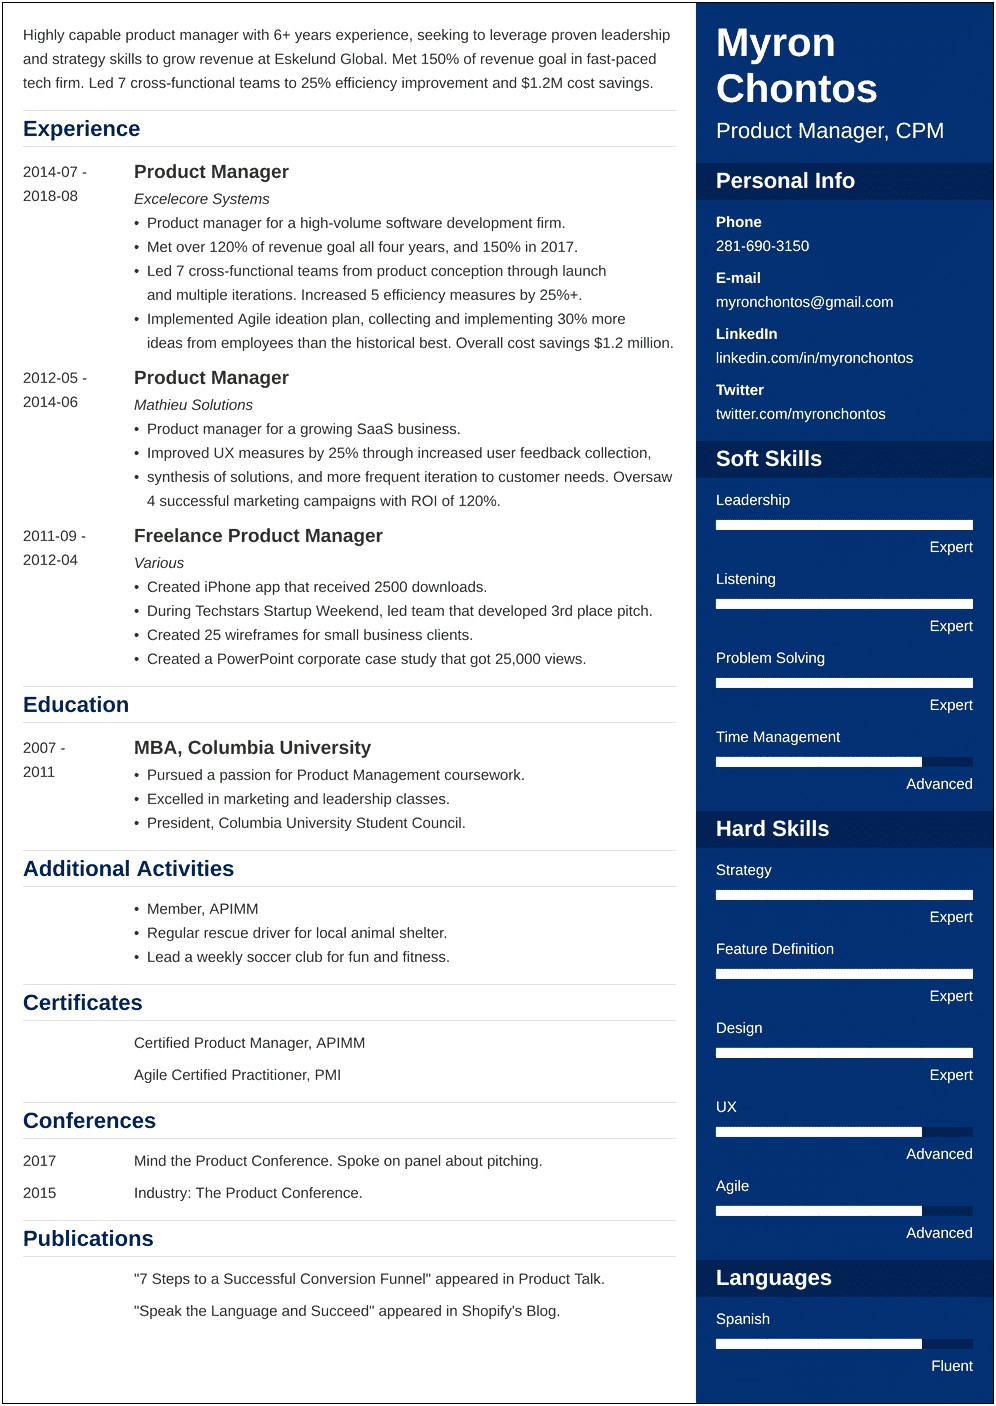 Best Product Manager Resume 2018